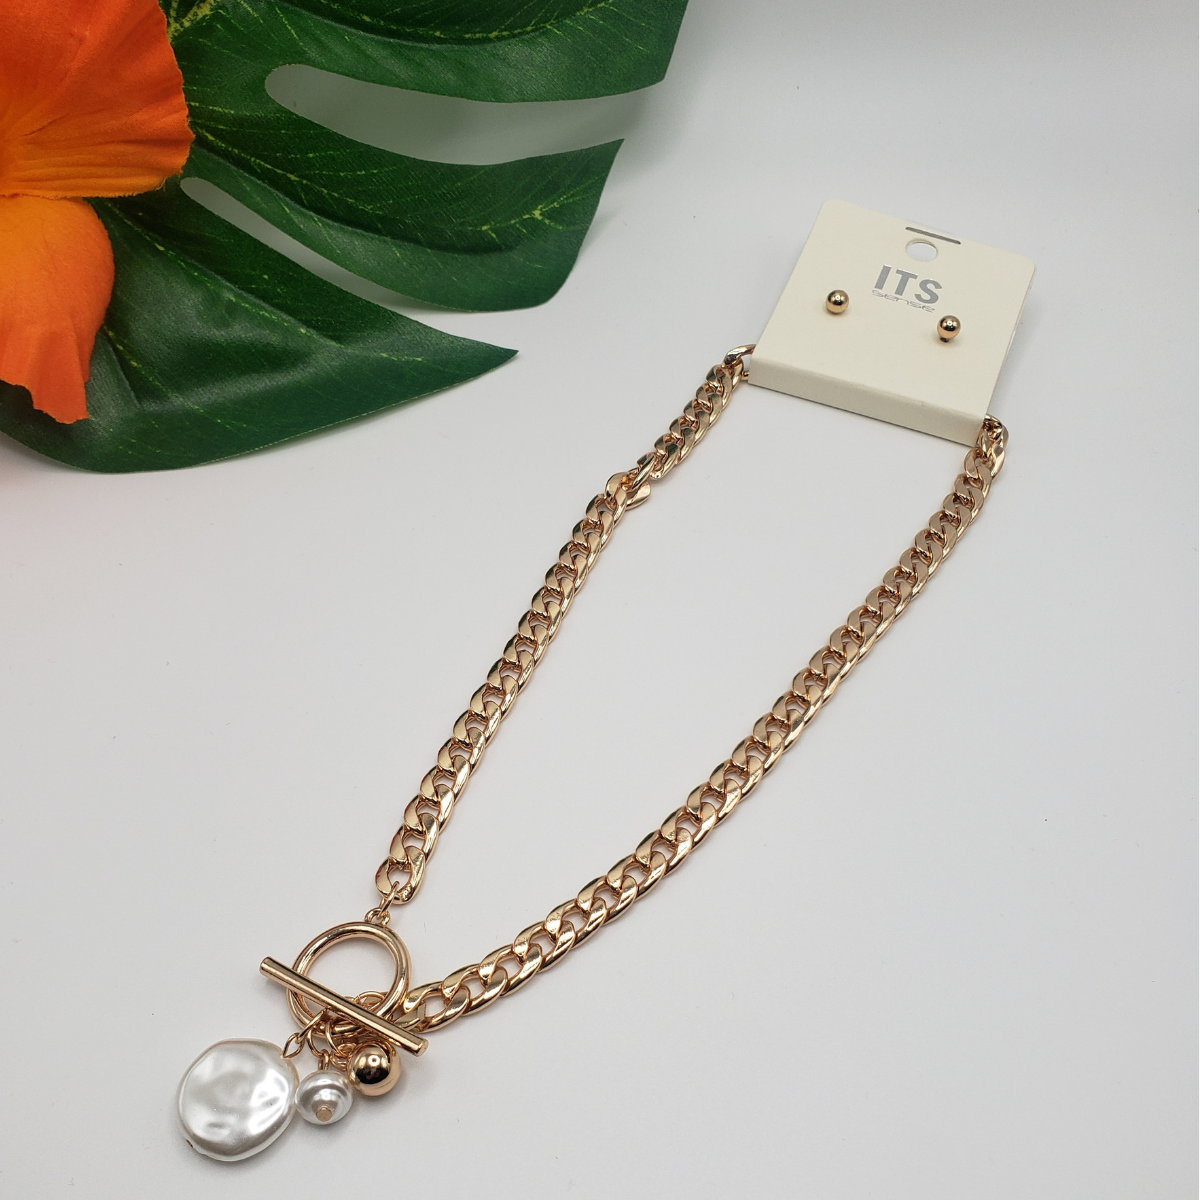 A SPECIAL EFFECTS Coin Pearl Toggle Chain Necklace and earring set featuring a Fresh Water Pearl charm on a goldtone chain.